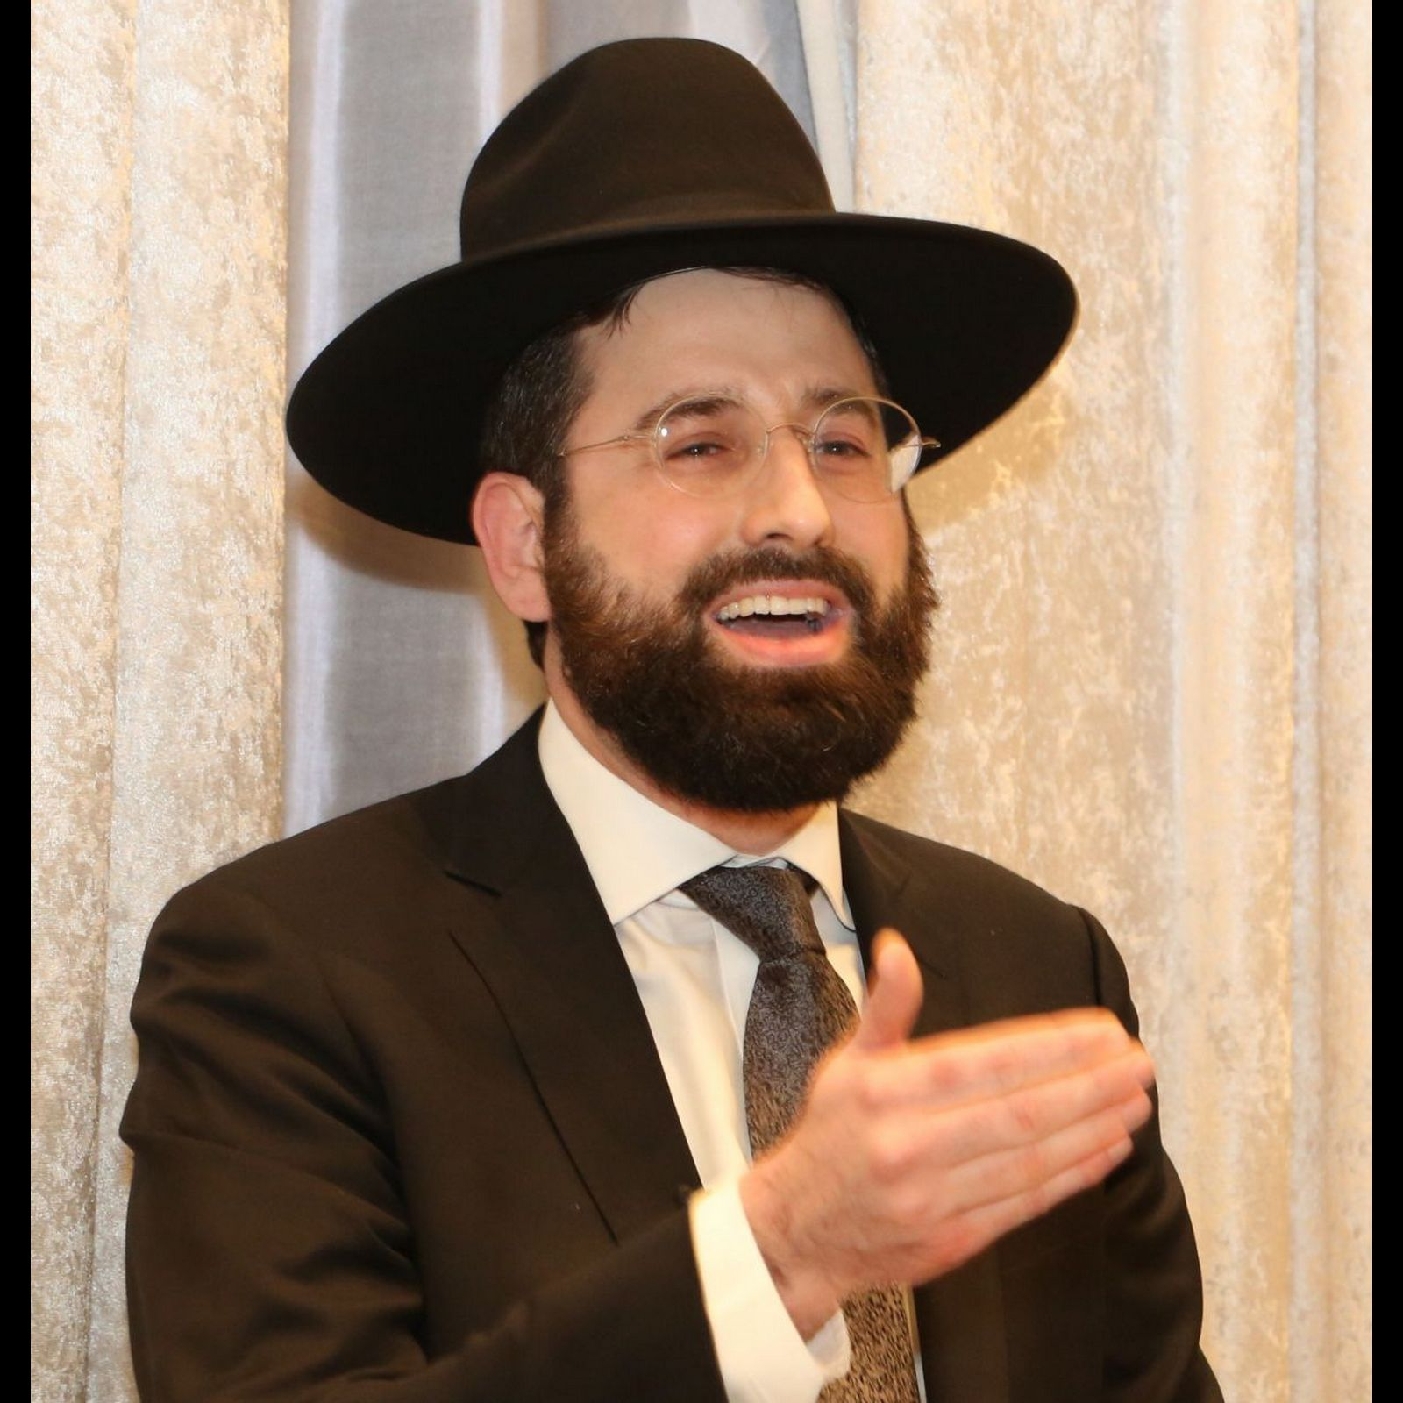 Rabbi Glatstein Live on JMintheAm {The Nachum Segal Network} Lag BaOmer - The Fire and the Soul